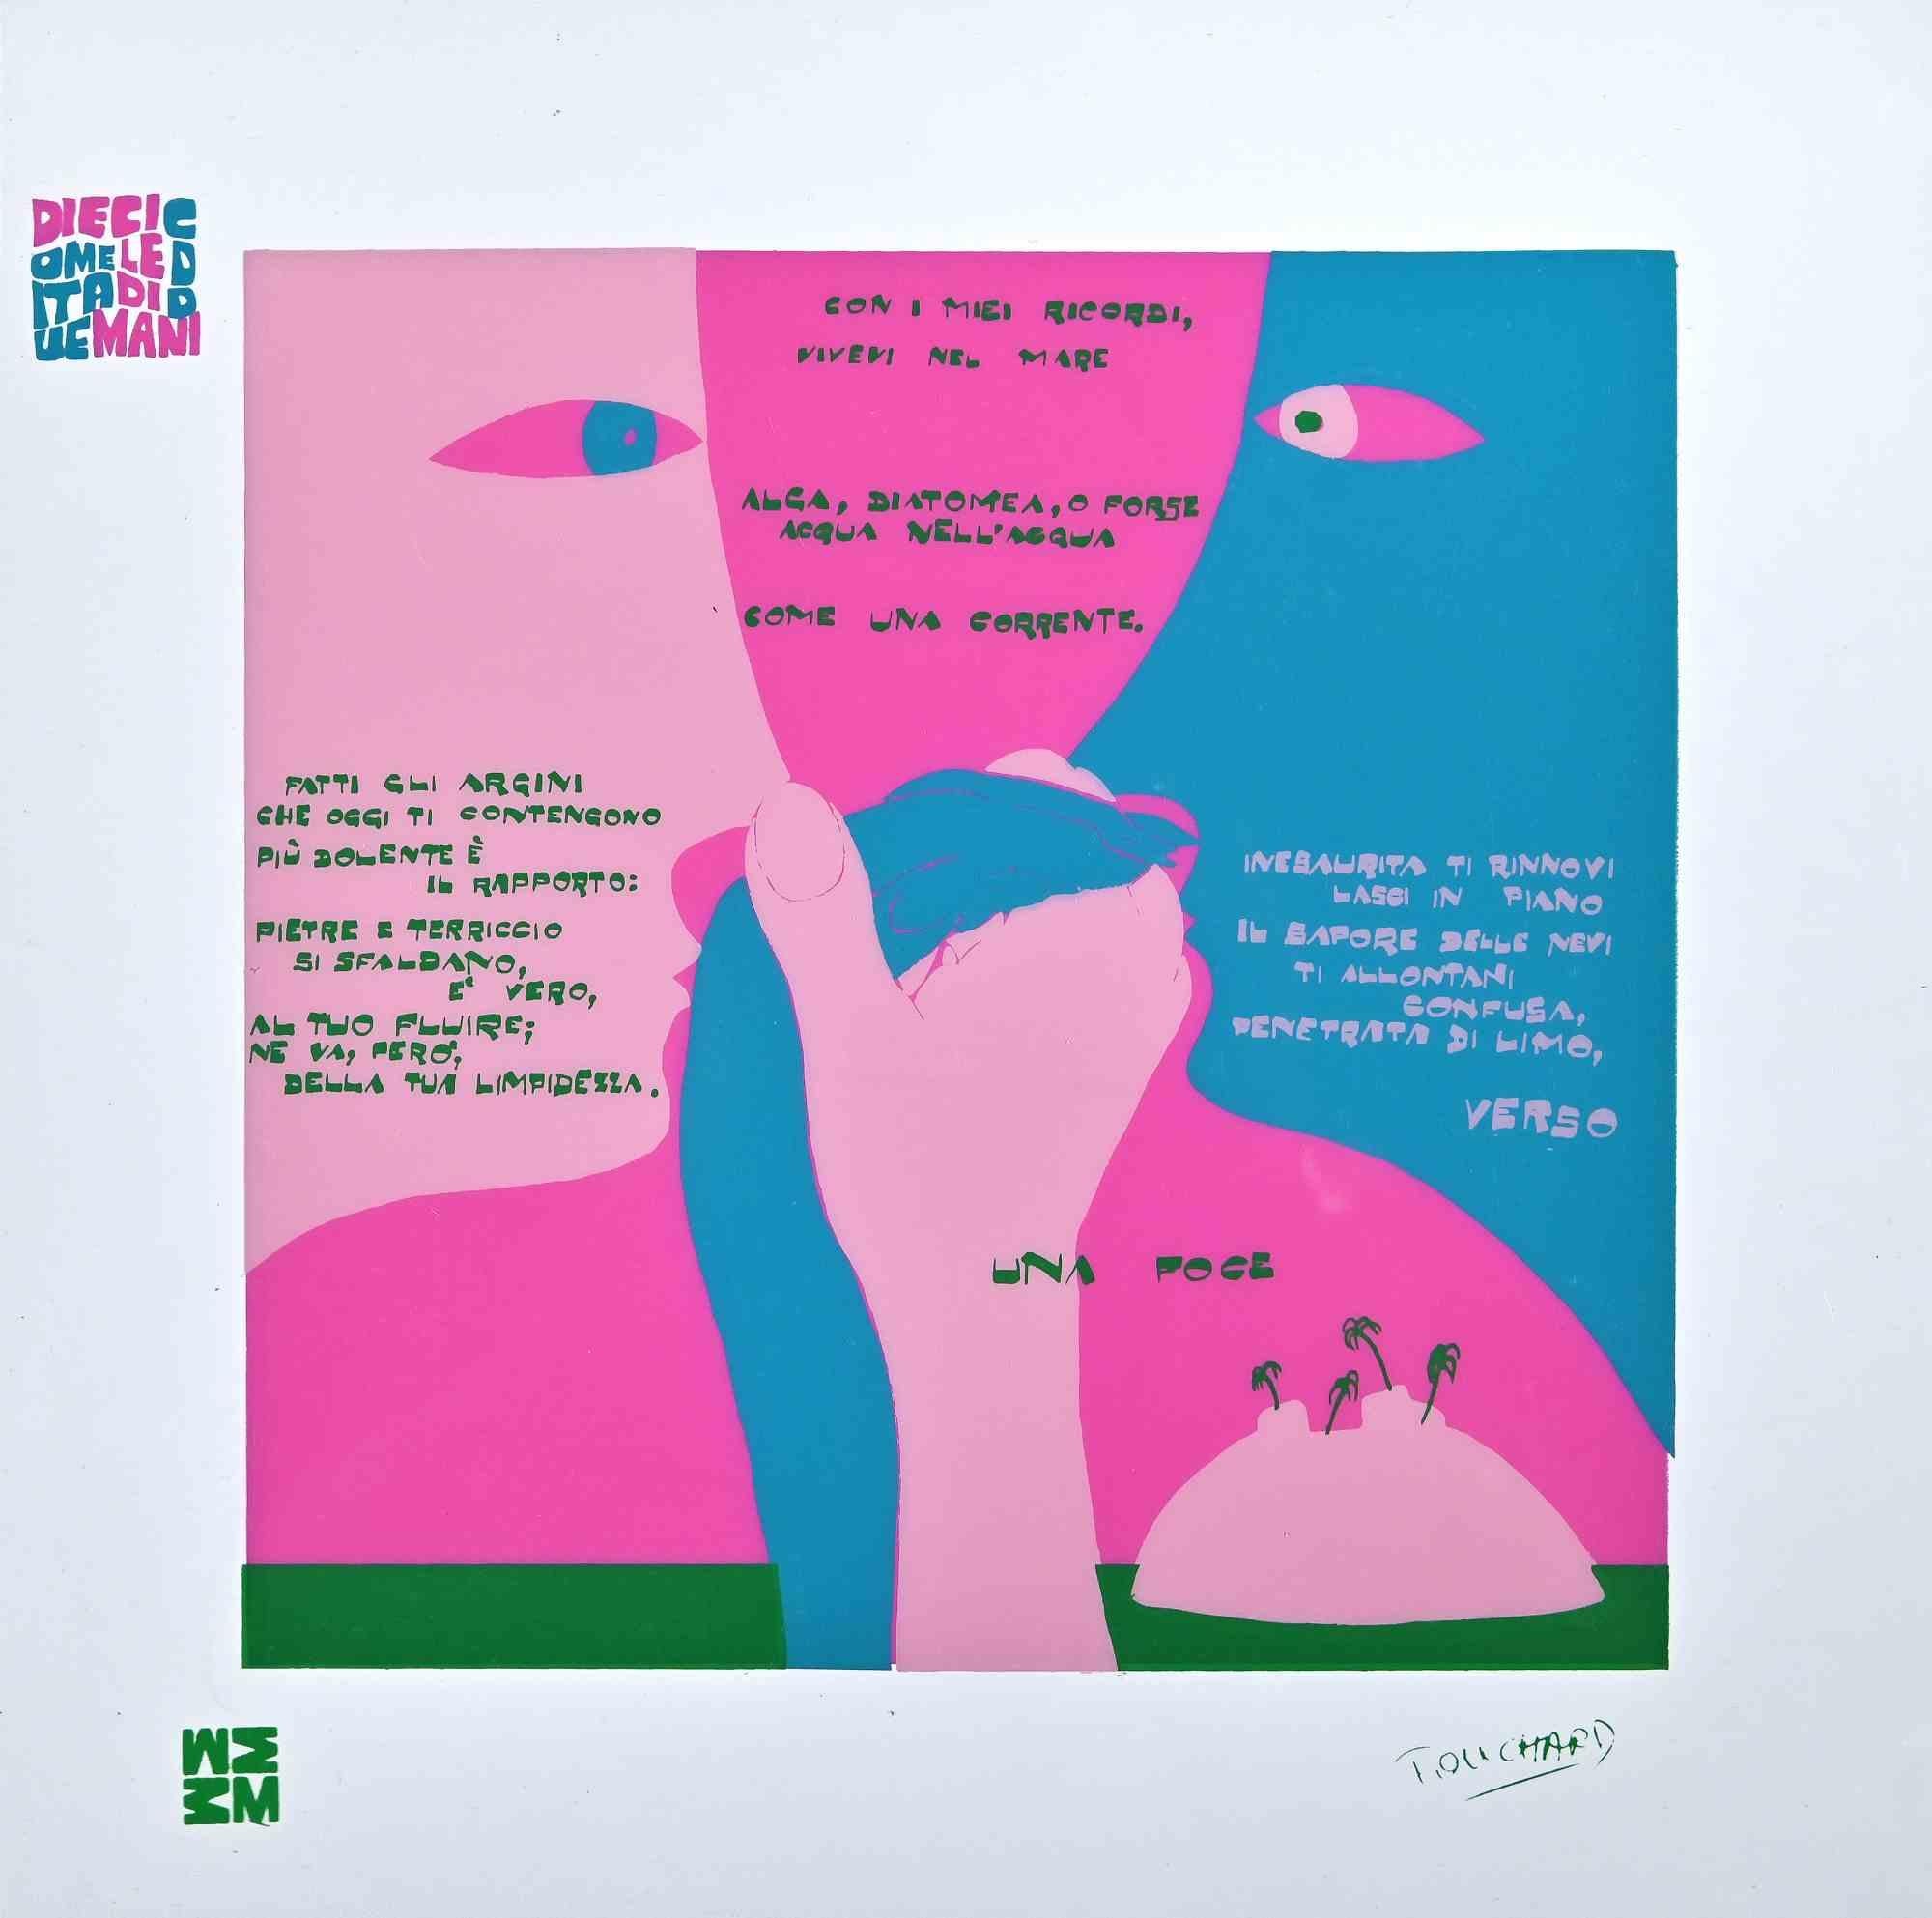 Una Foce - Diecicomeleditadiduemani  is a color silk-screen print on acetates, realized in  1973  by the artist  Ennio Pouchard  (1928).

Signed on plate  on the lower right.

From the porfolio " Diecicomeleditadiduemani ", containing 10 silk-screen